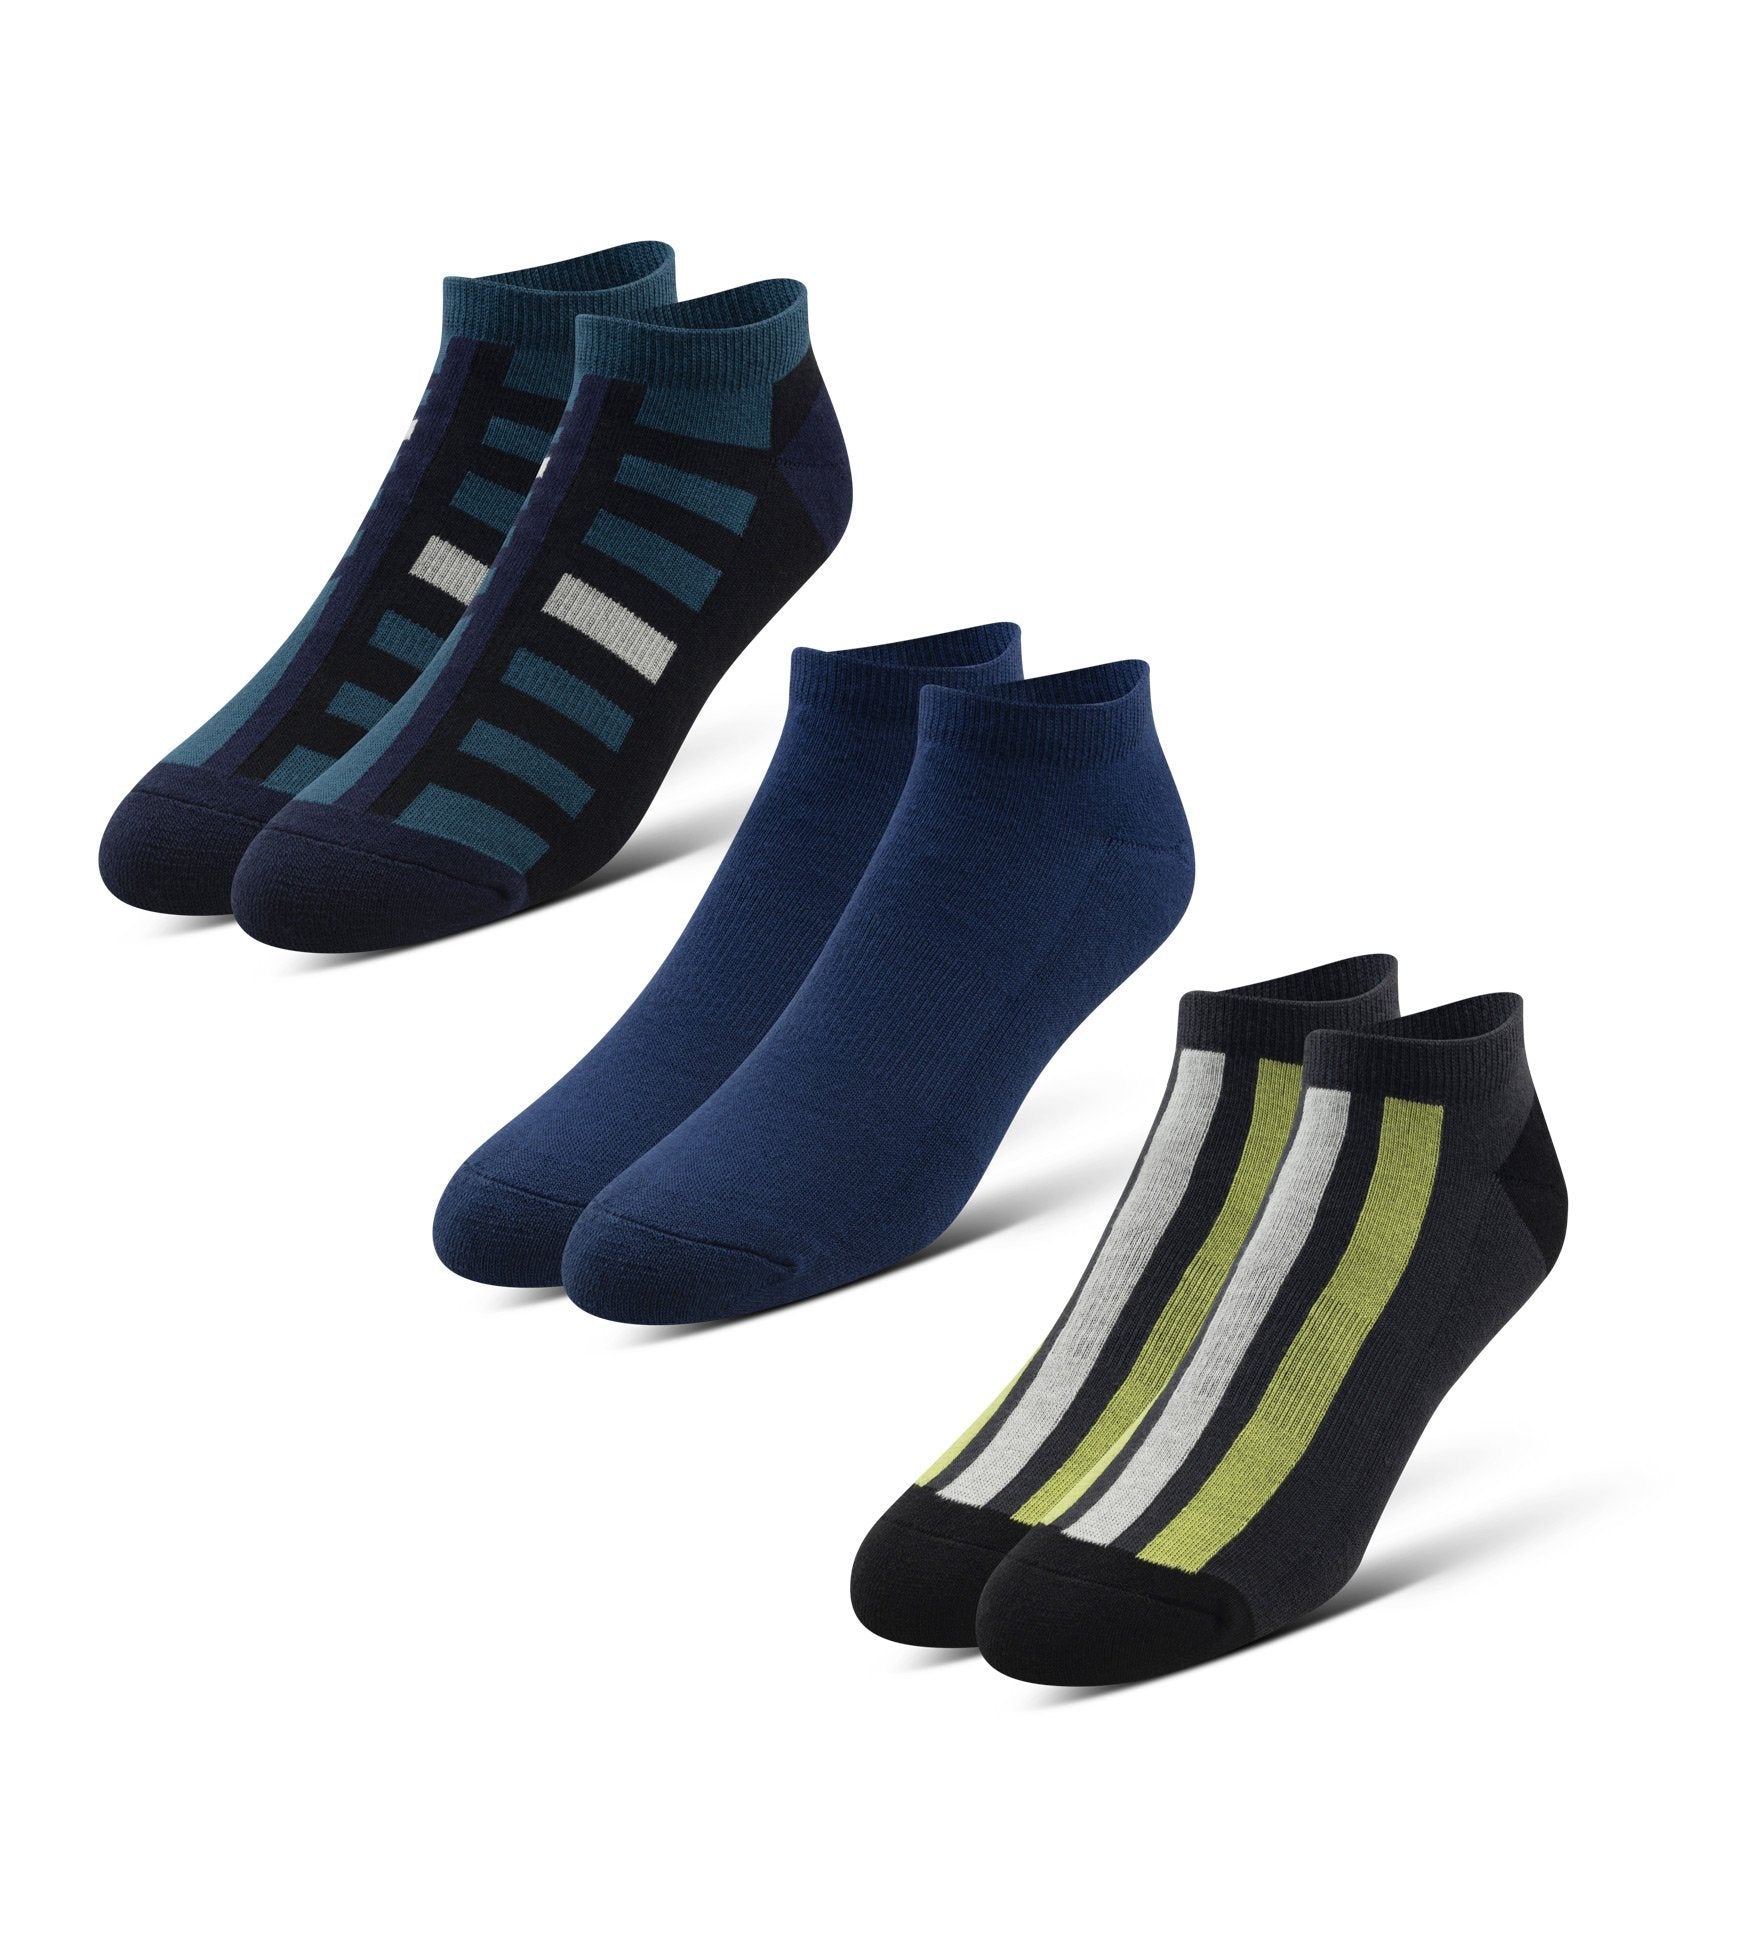 Cushion Low-Cut Socks 3 Pack in green blue and white